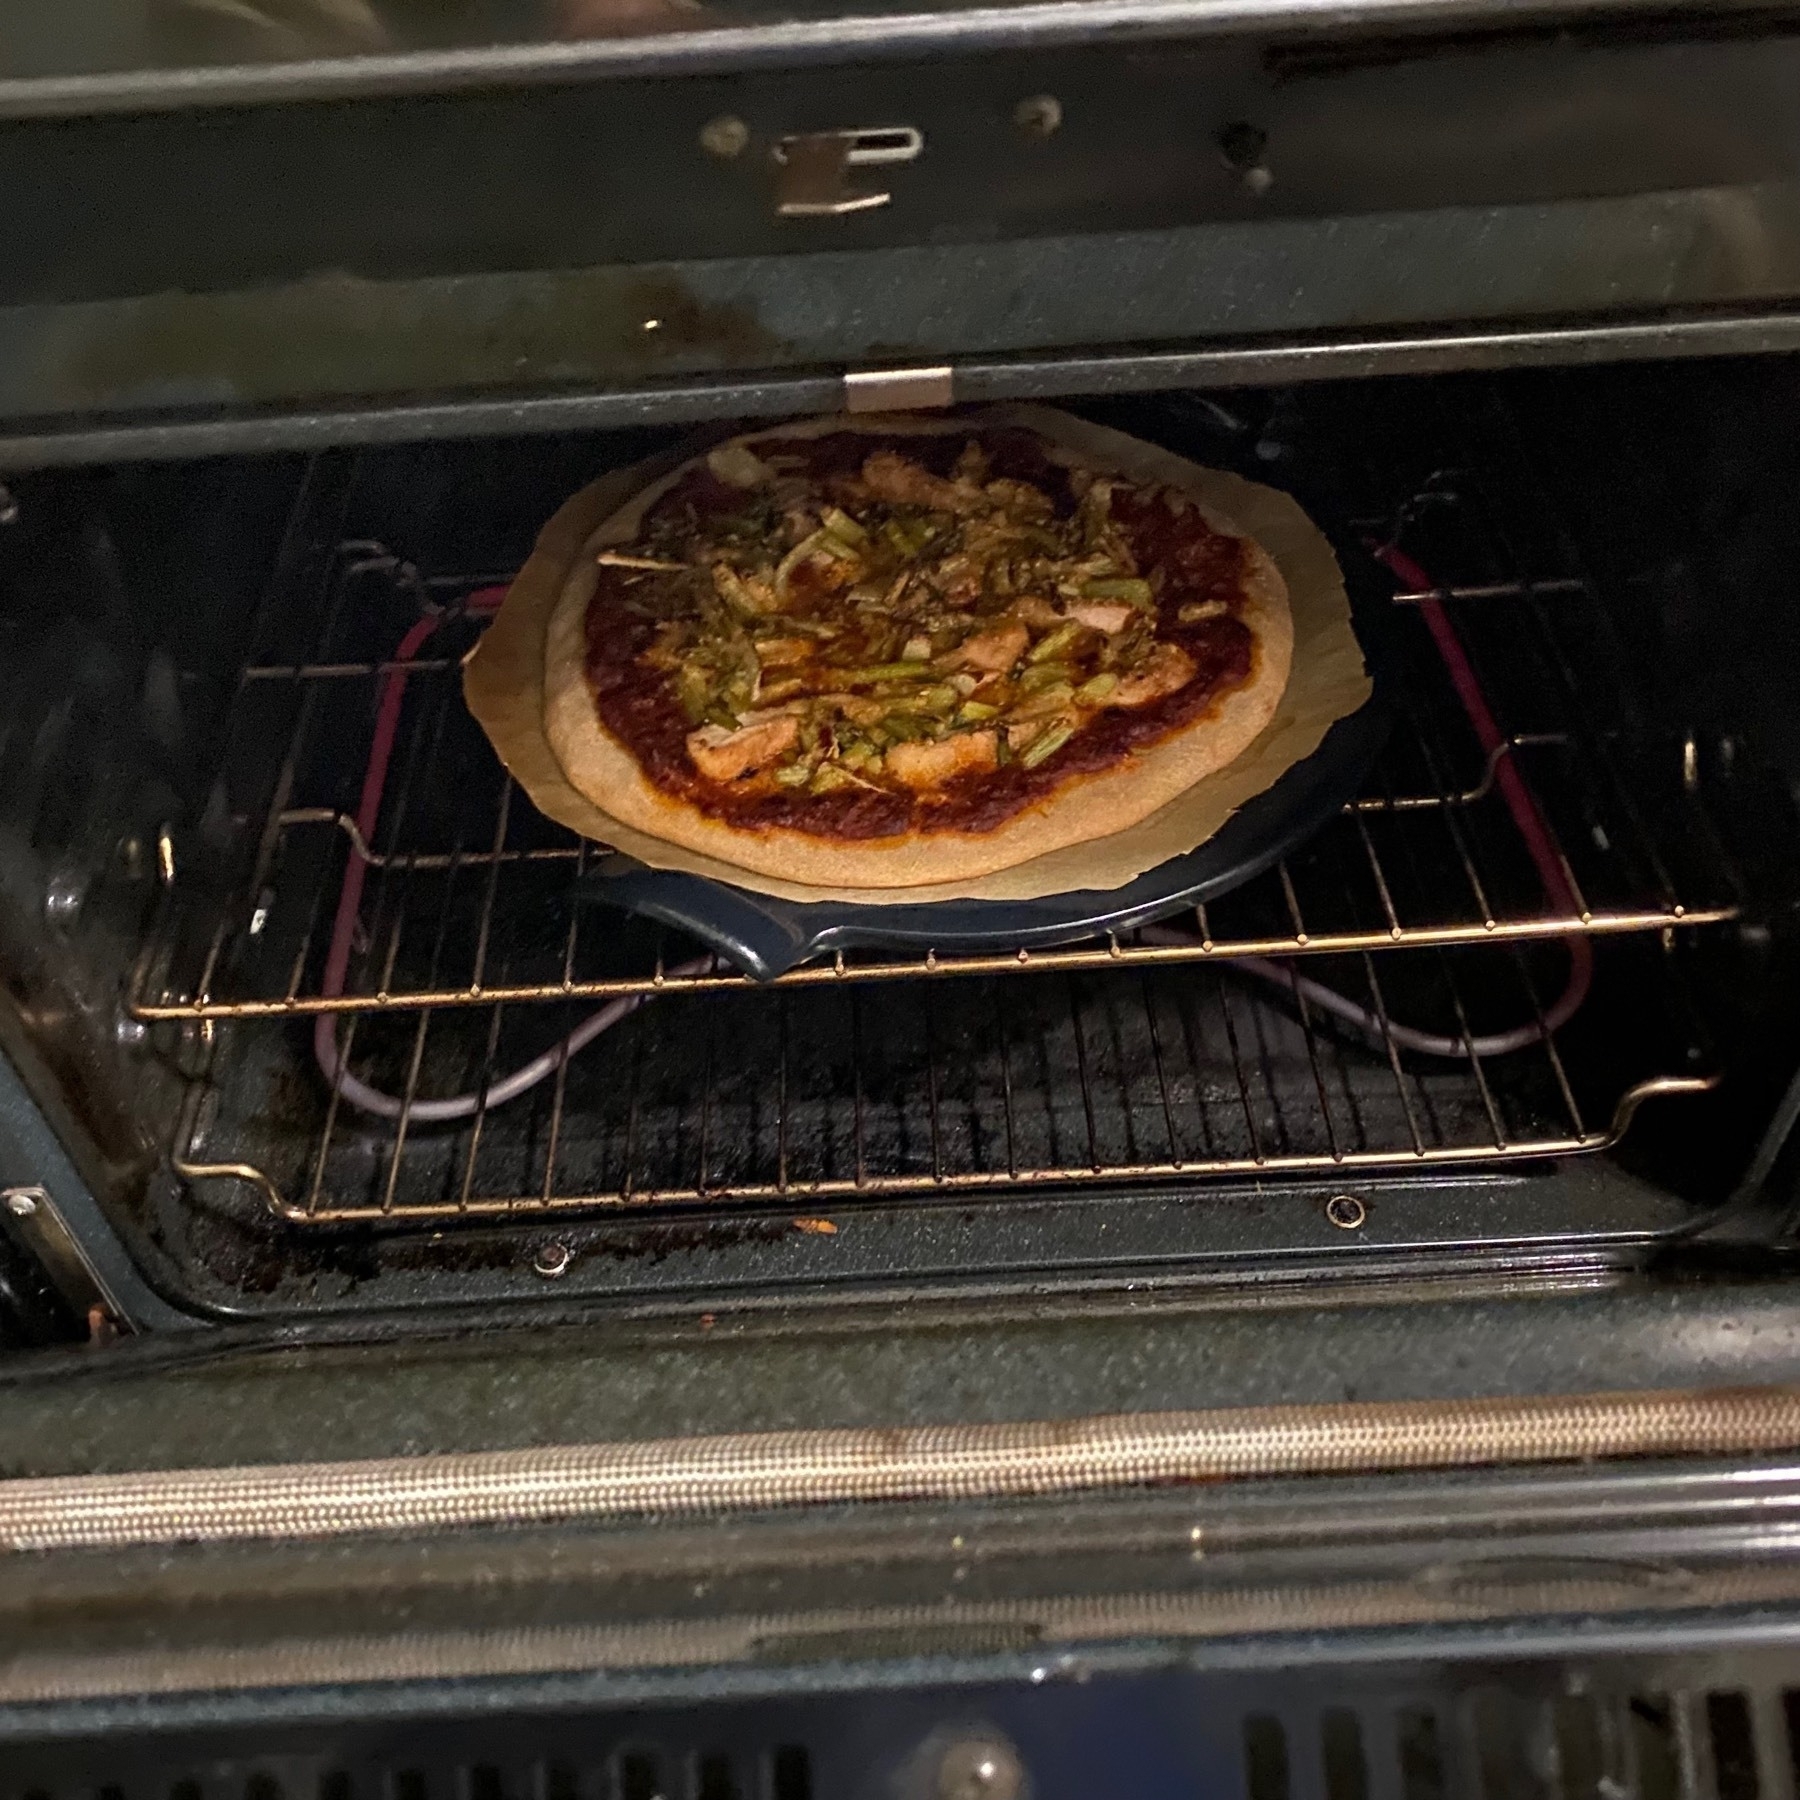 Pizza on a rack in an oven.